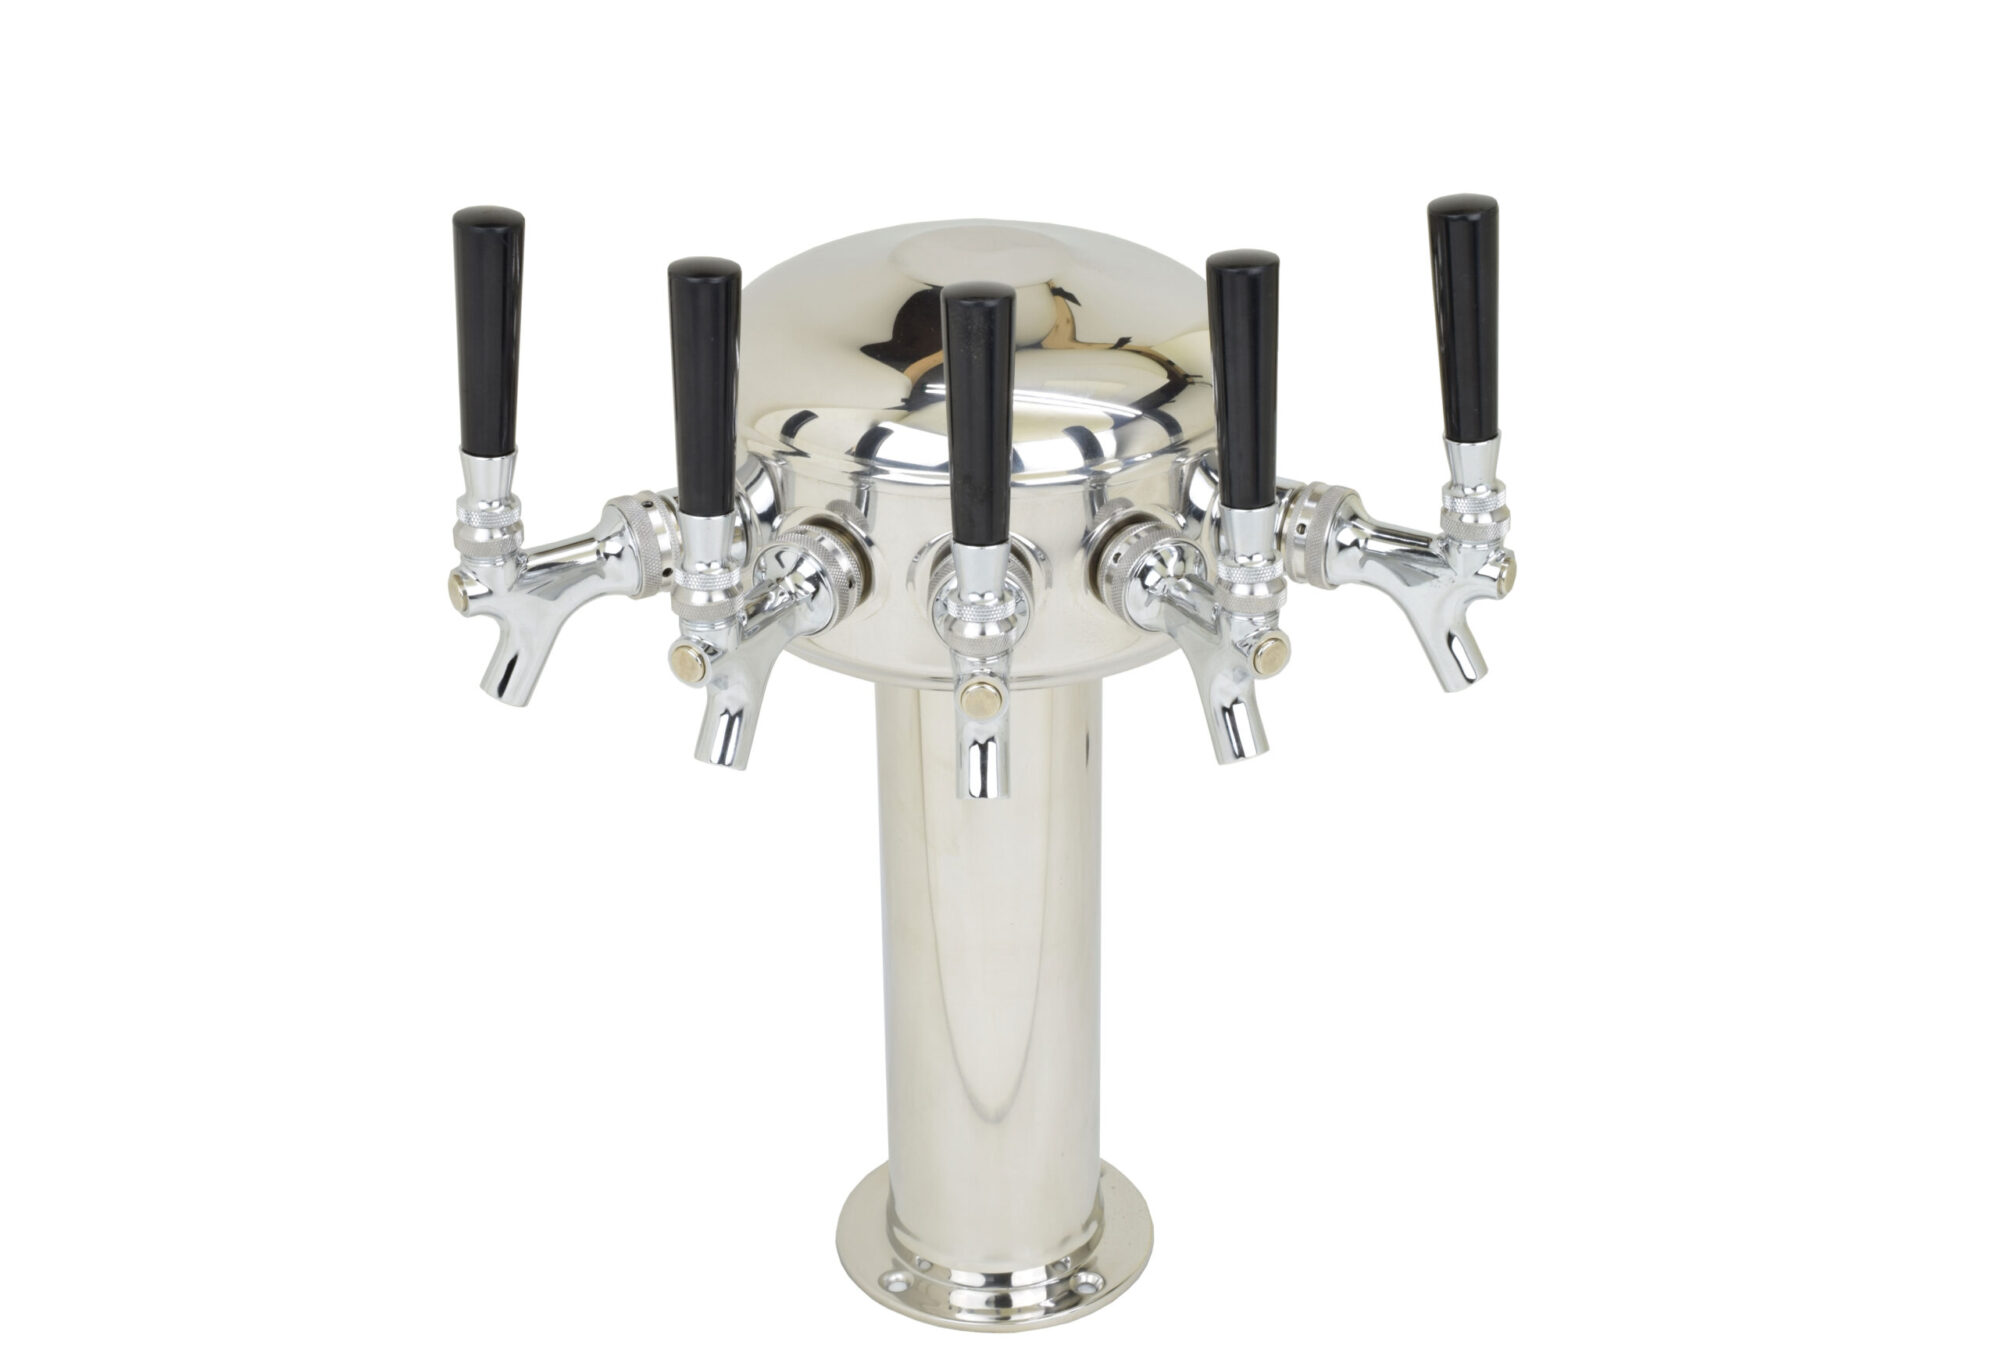 626CG-5SS Five Faucet Mini Mushroom Tower with 304 SS Faucets and Shanks - Glycol Ready